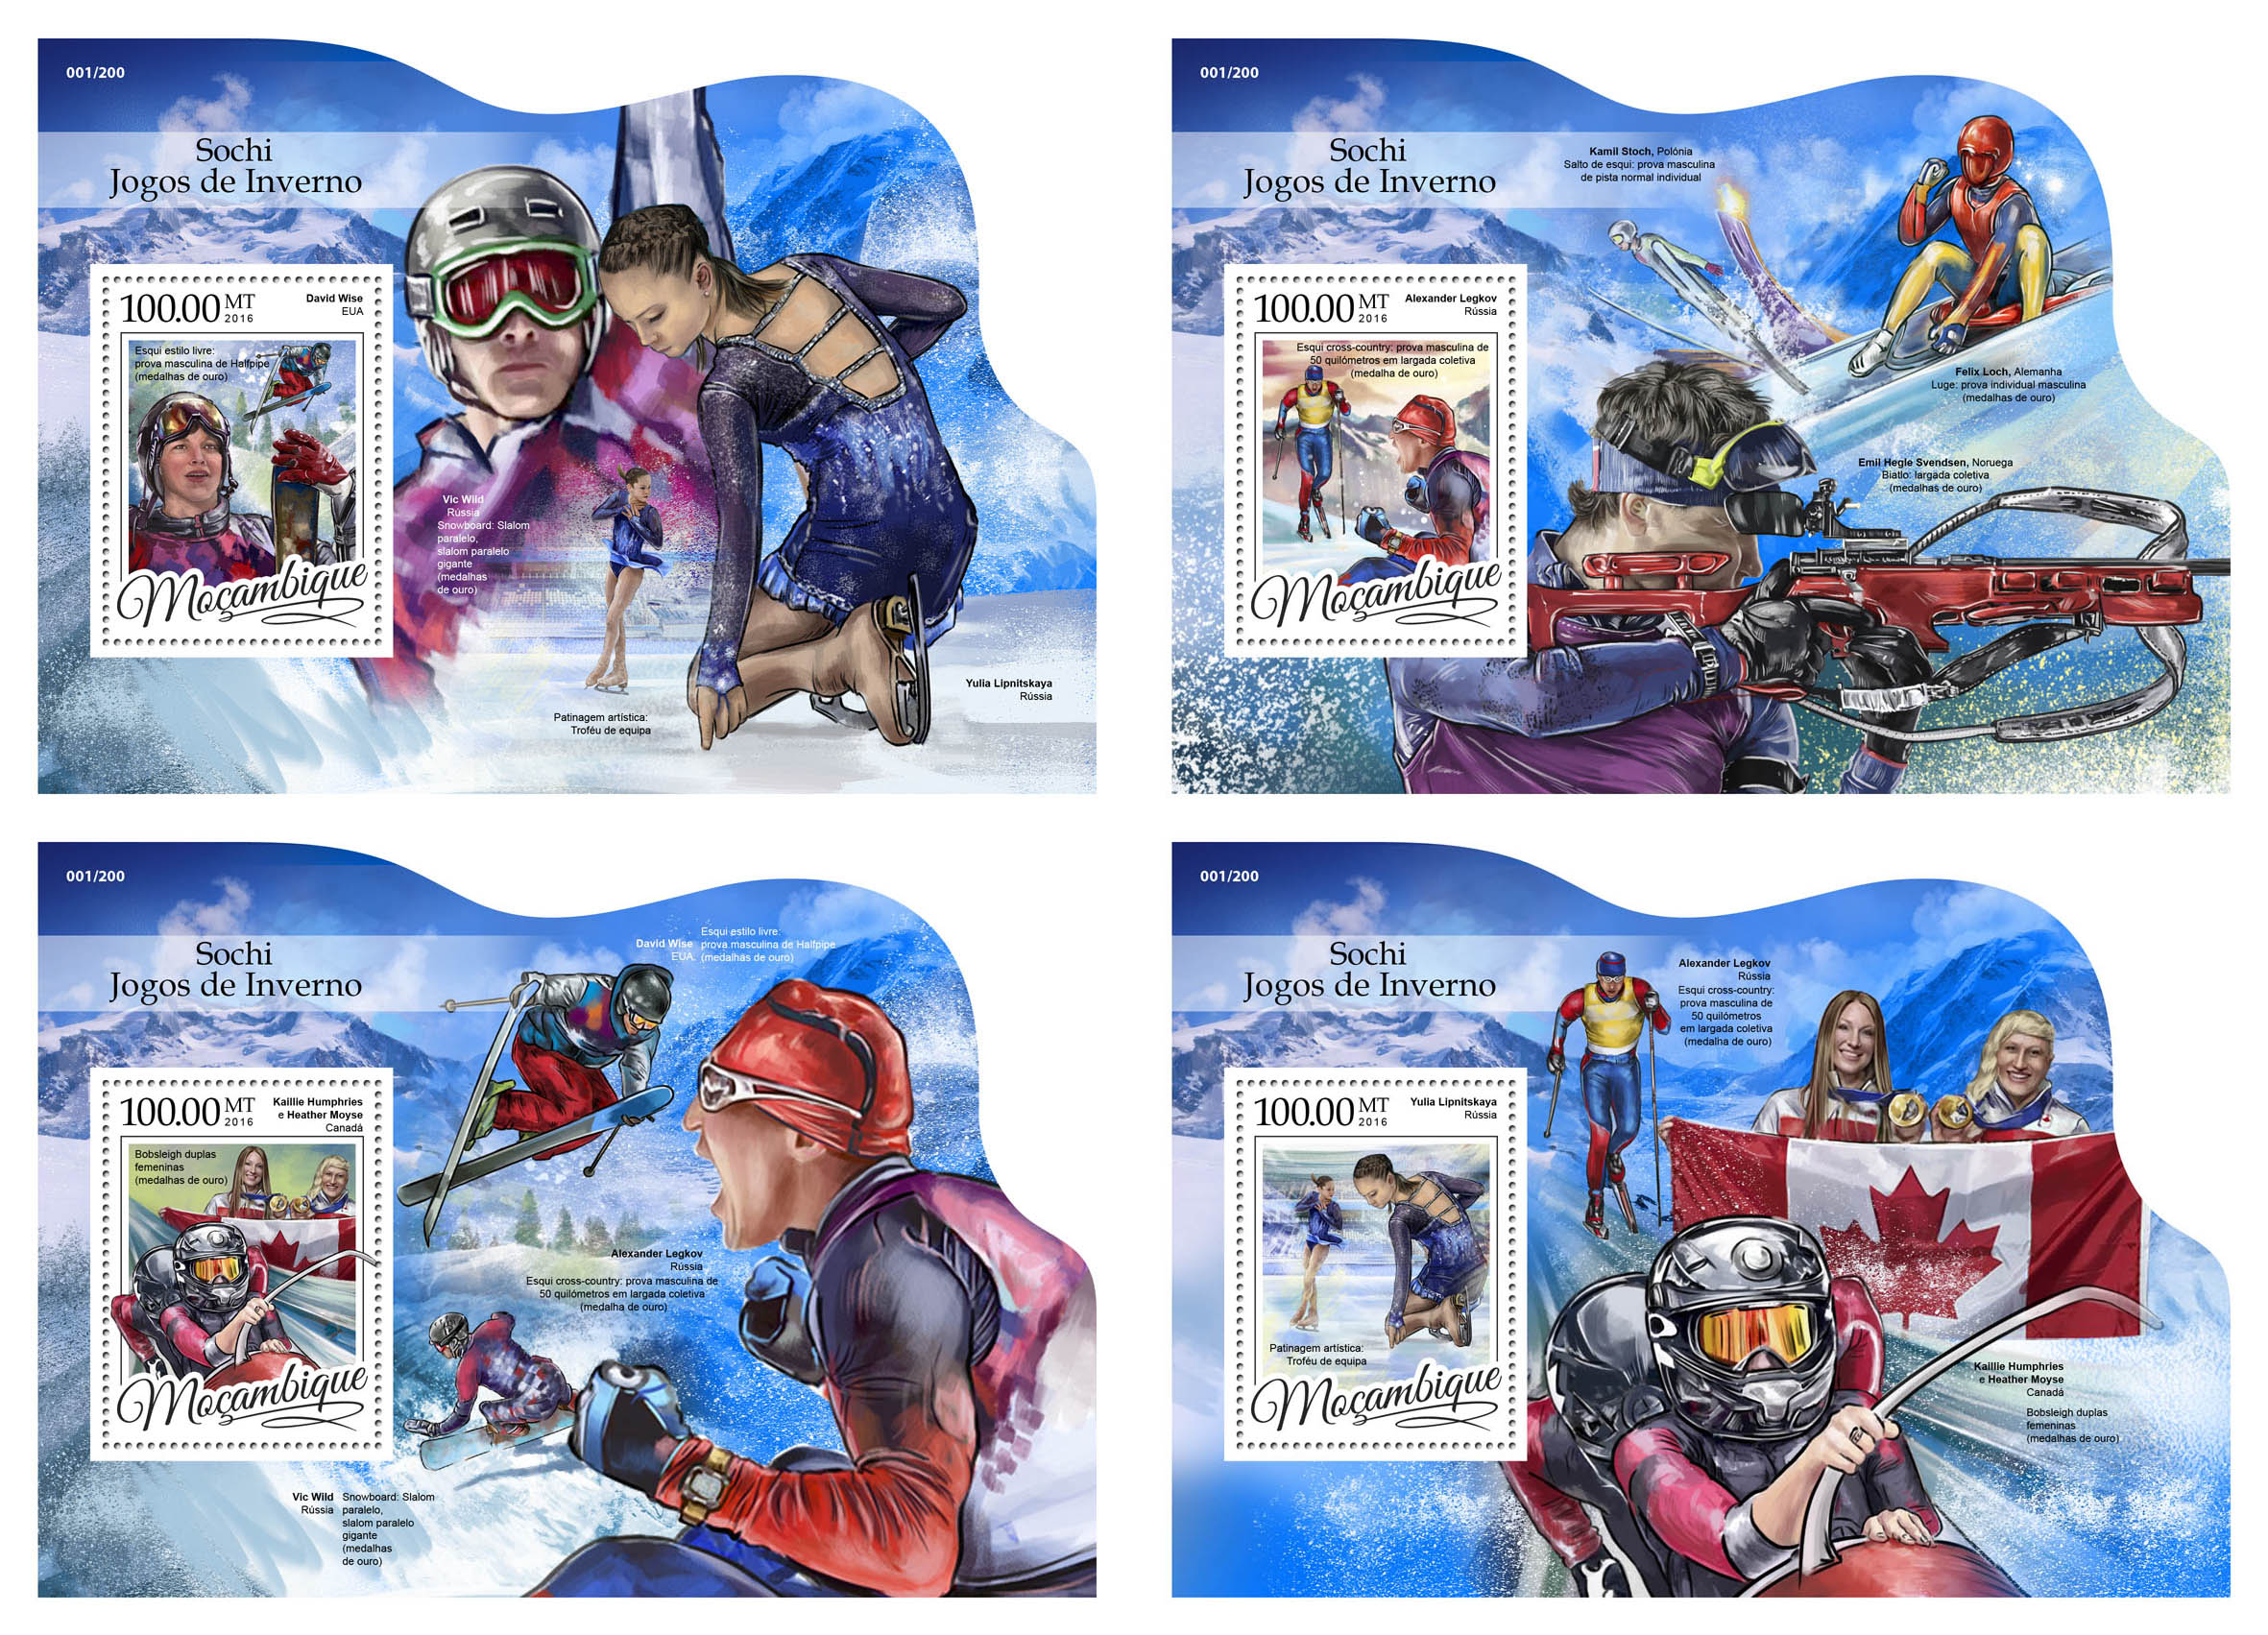 Sochi winter games - Issue of Mozambique postage Stamps